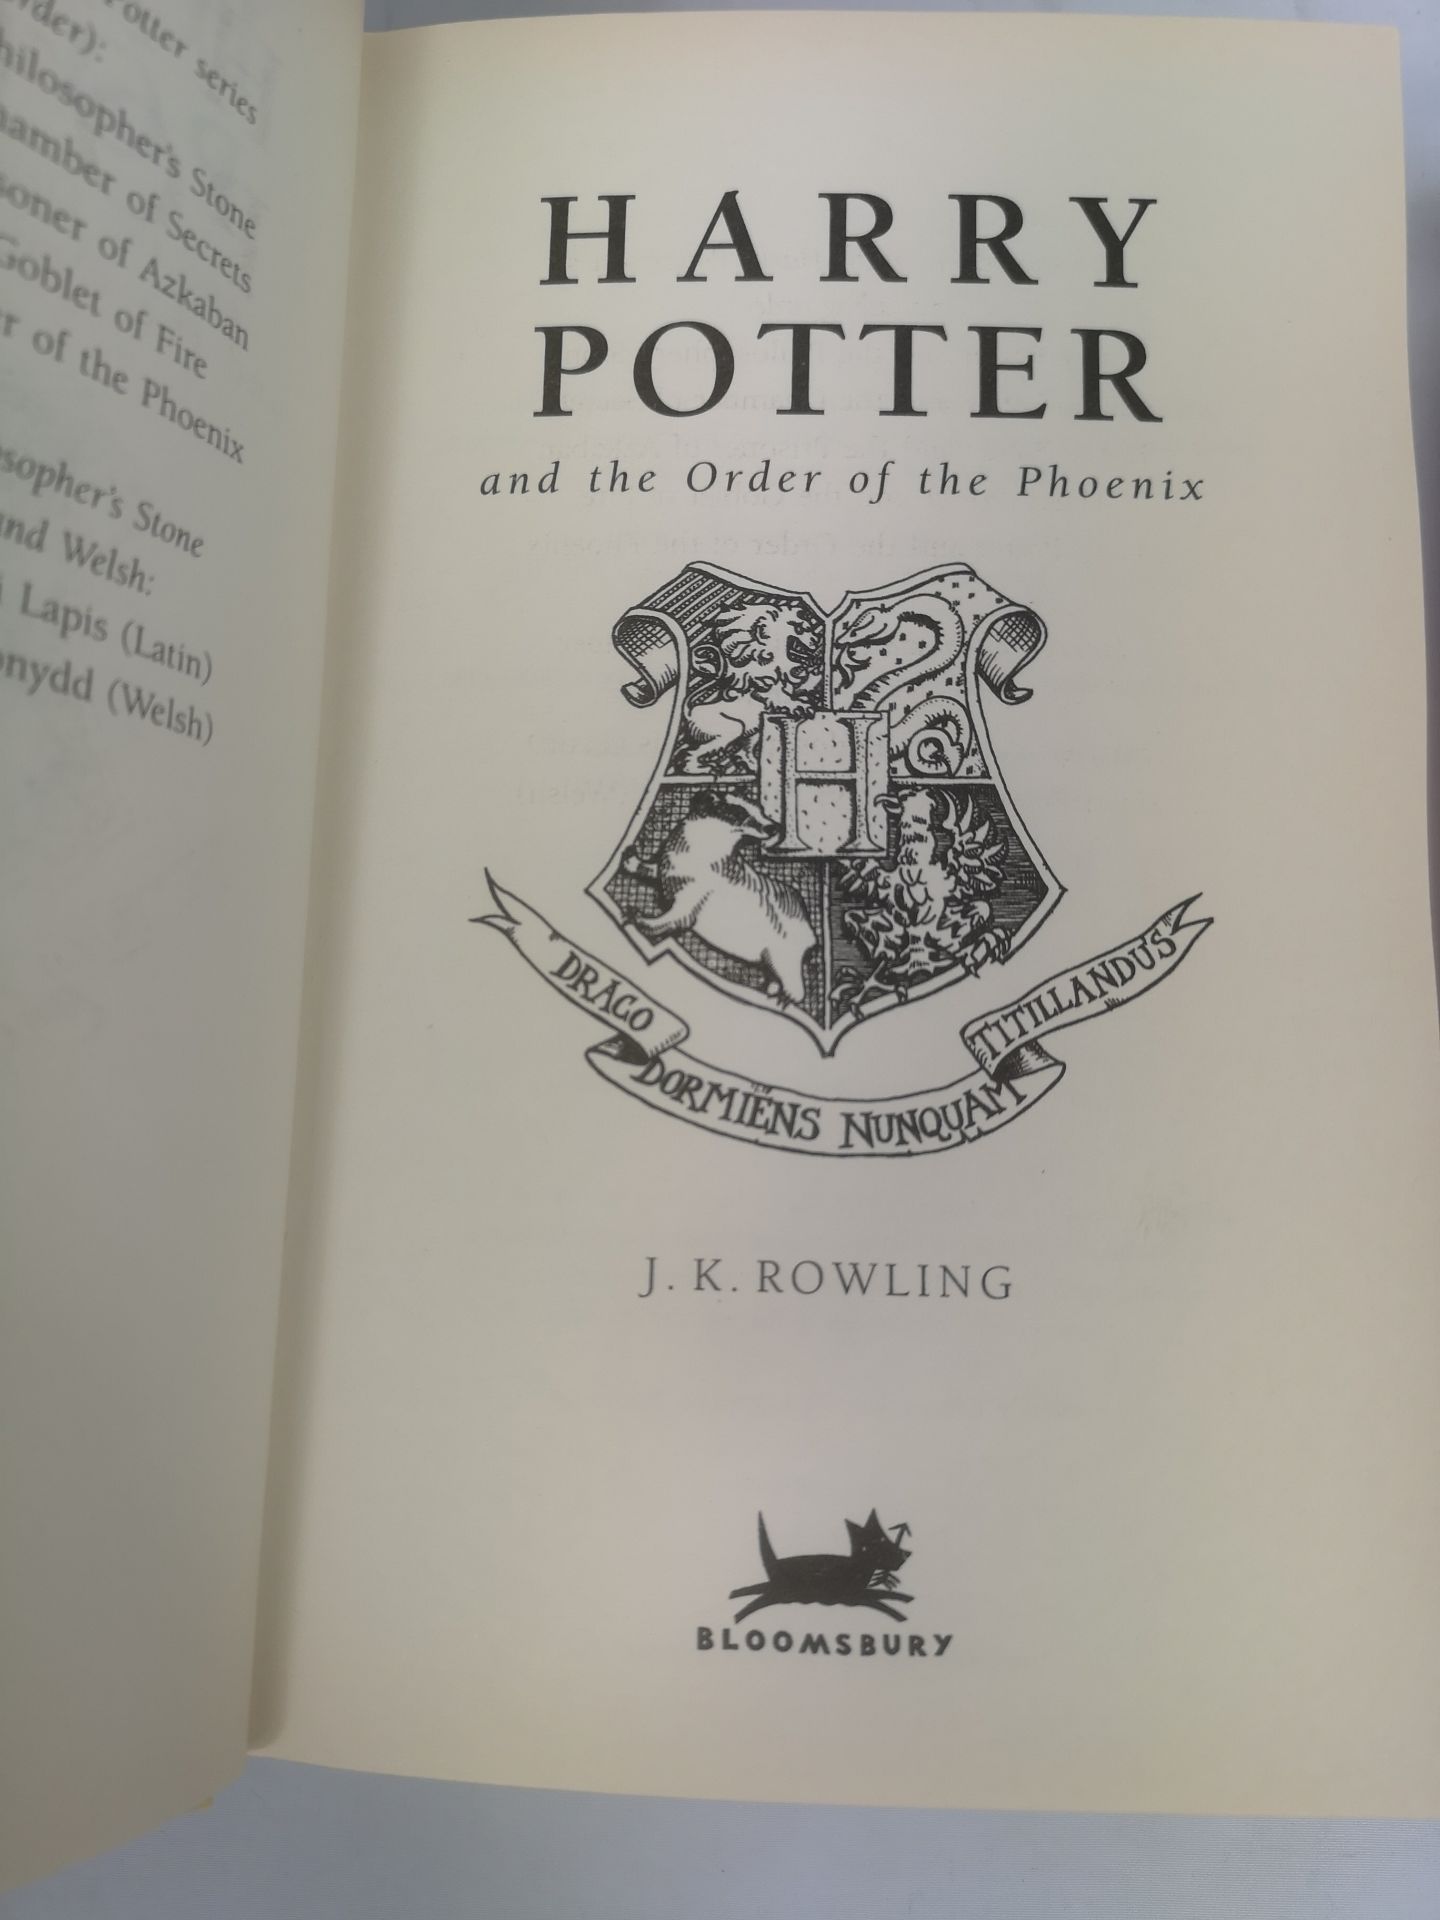 Harry Potter and the Order of the Phoenix - Image 4 of 8